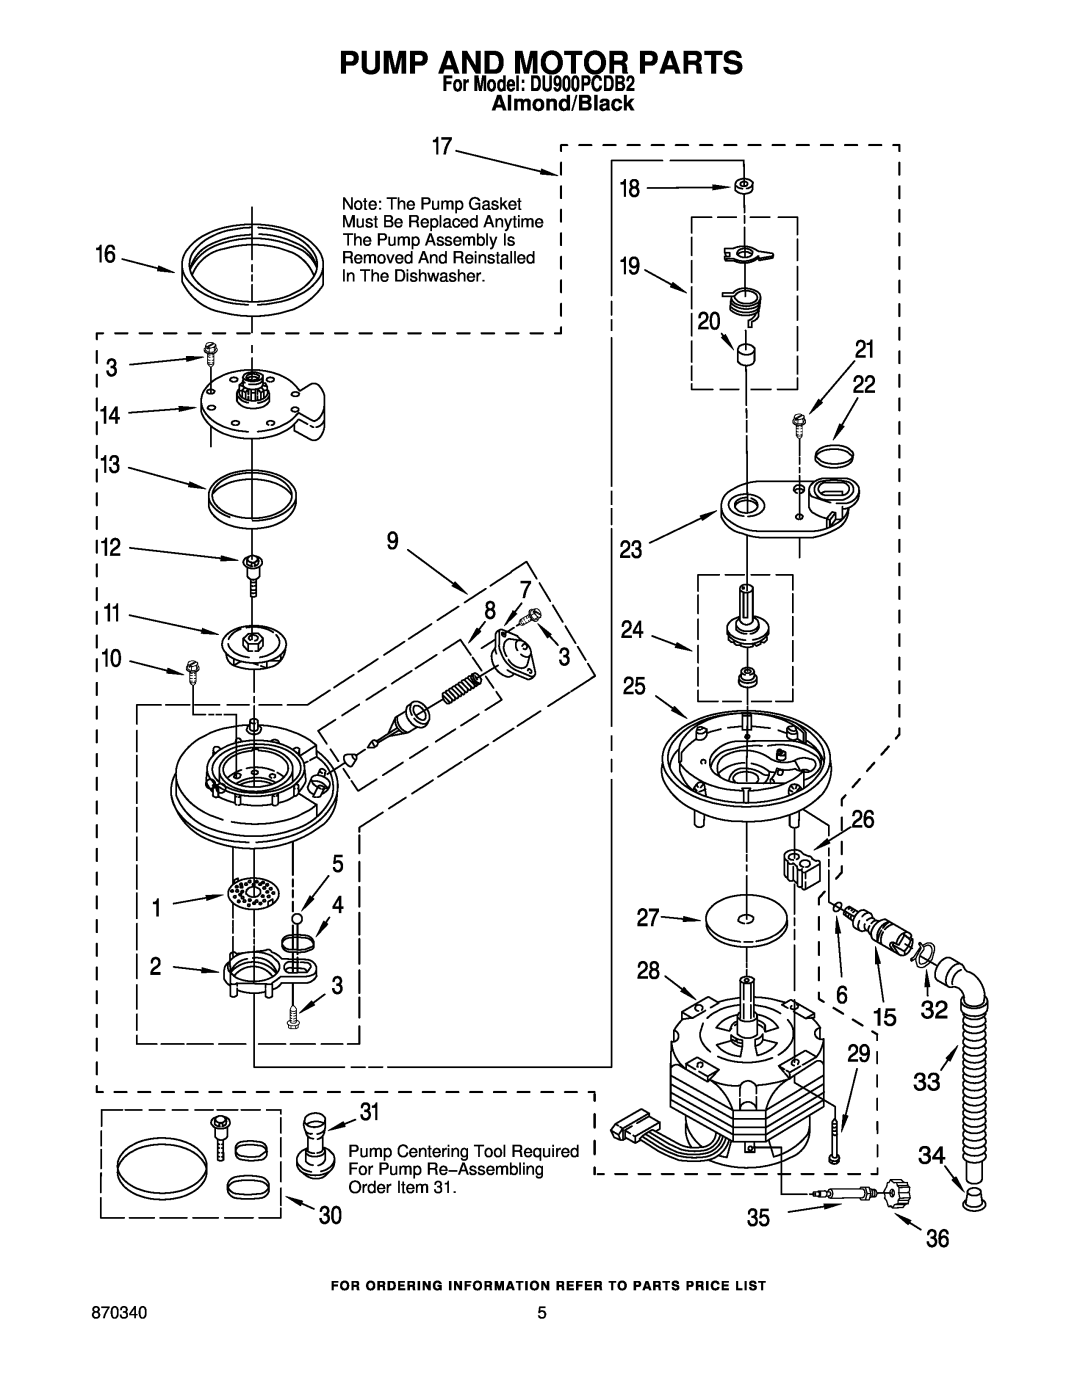 Whirlpool manual Pump And Motor Parts, For Model DU900PCDB2 Almond/Black, Note The Pump Gasket Must Be Replaced Anytime 